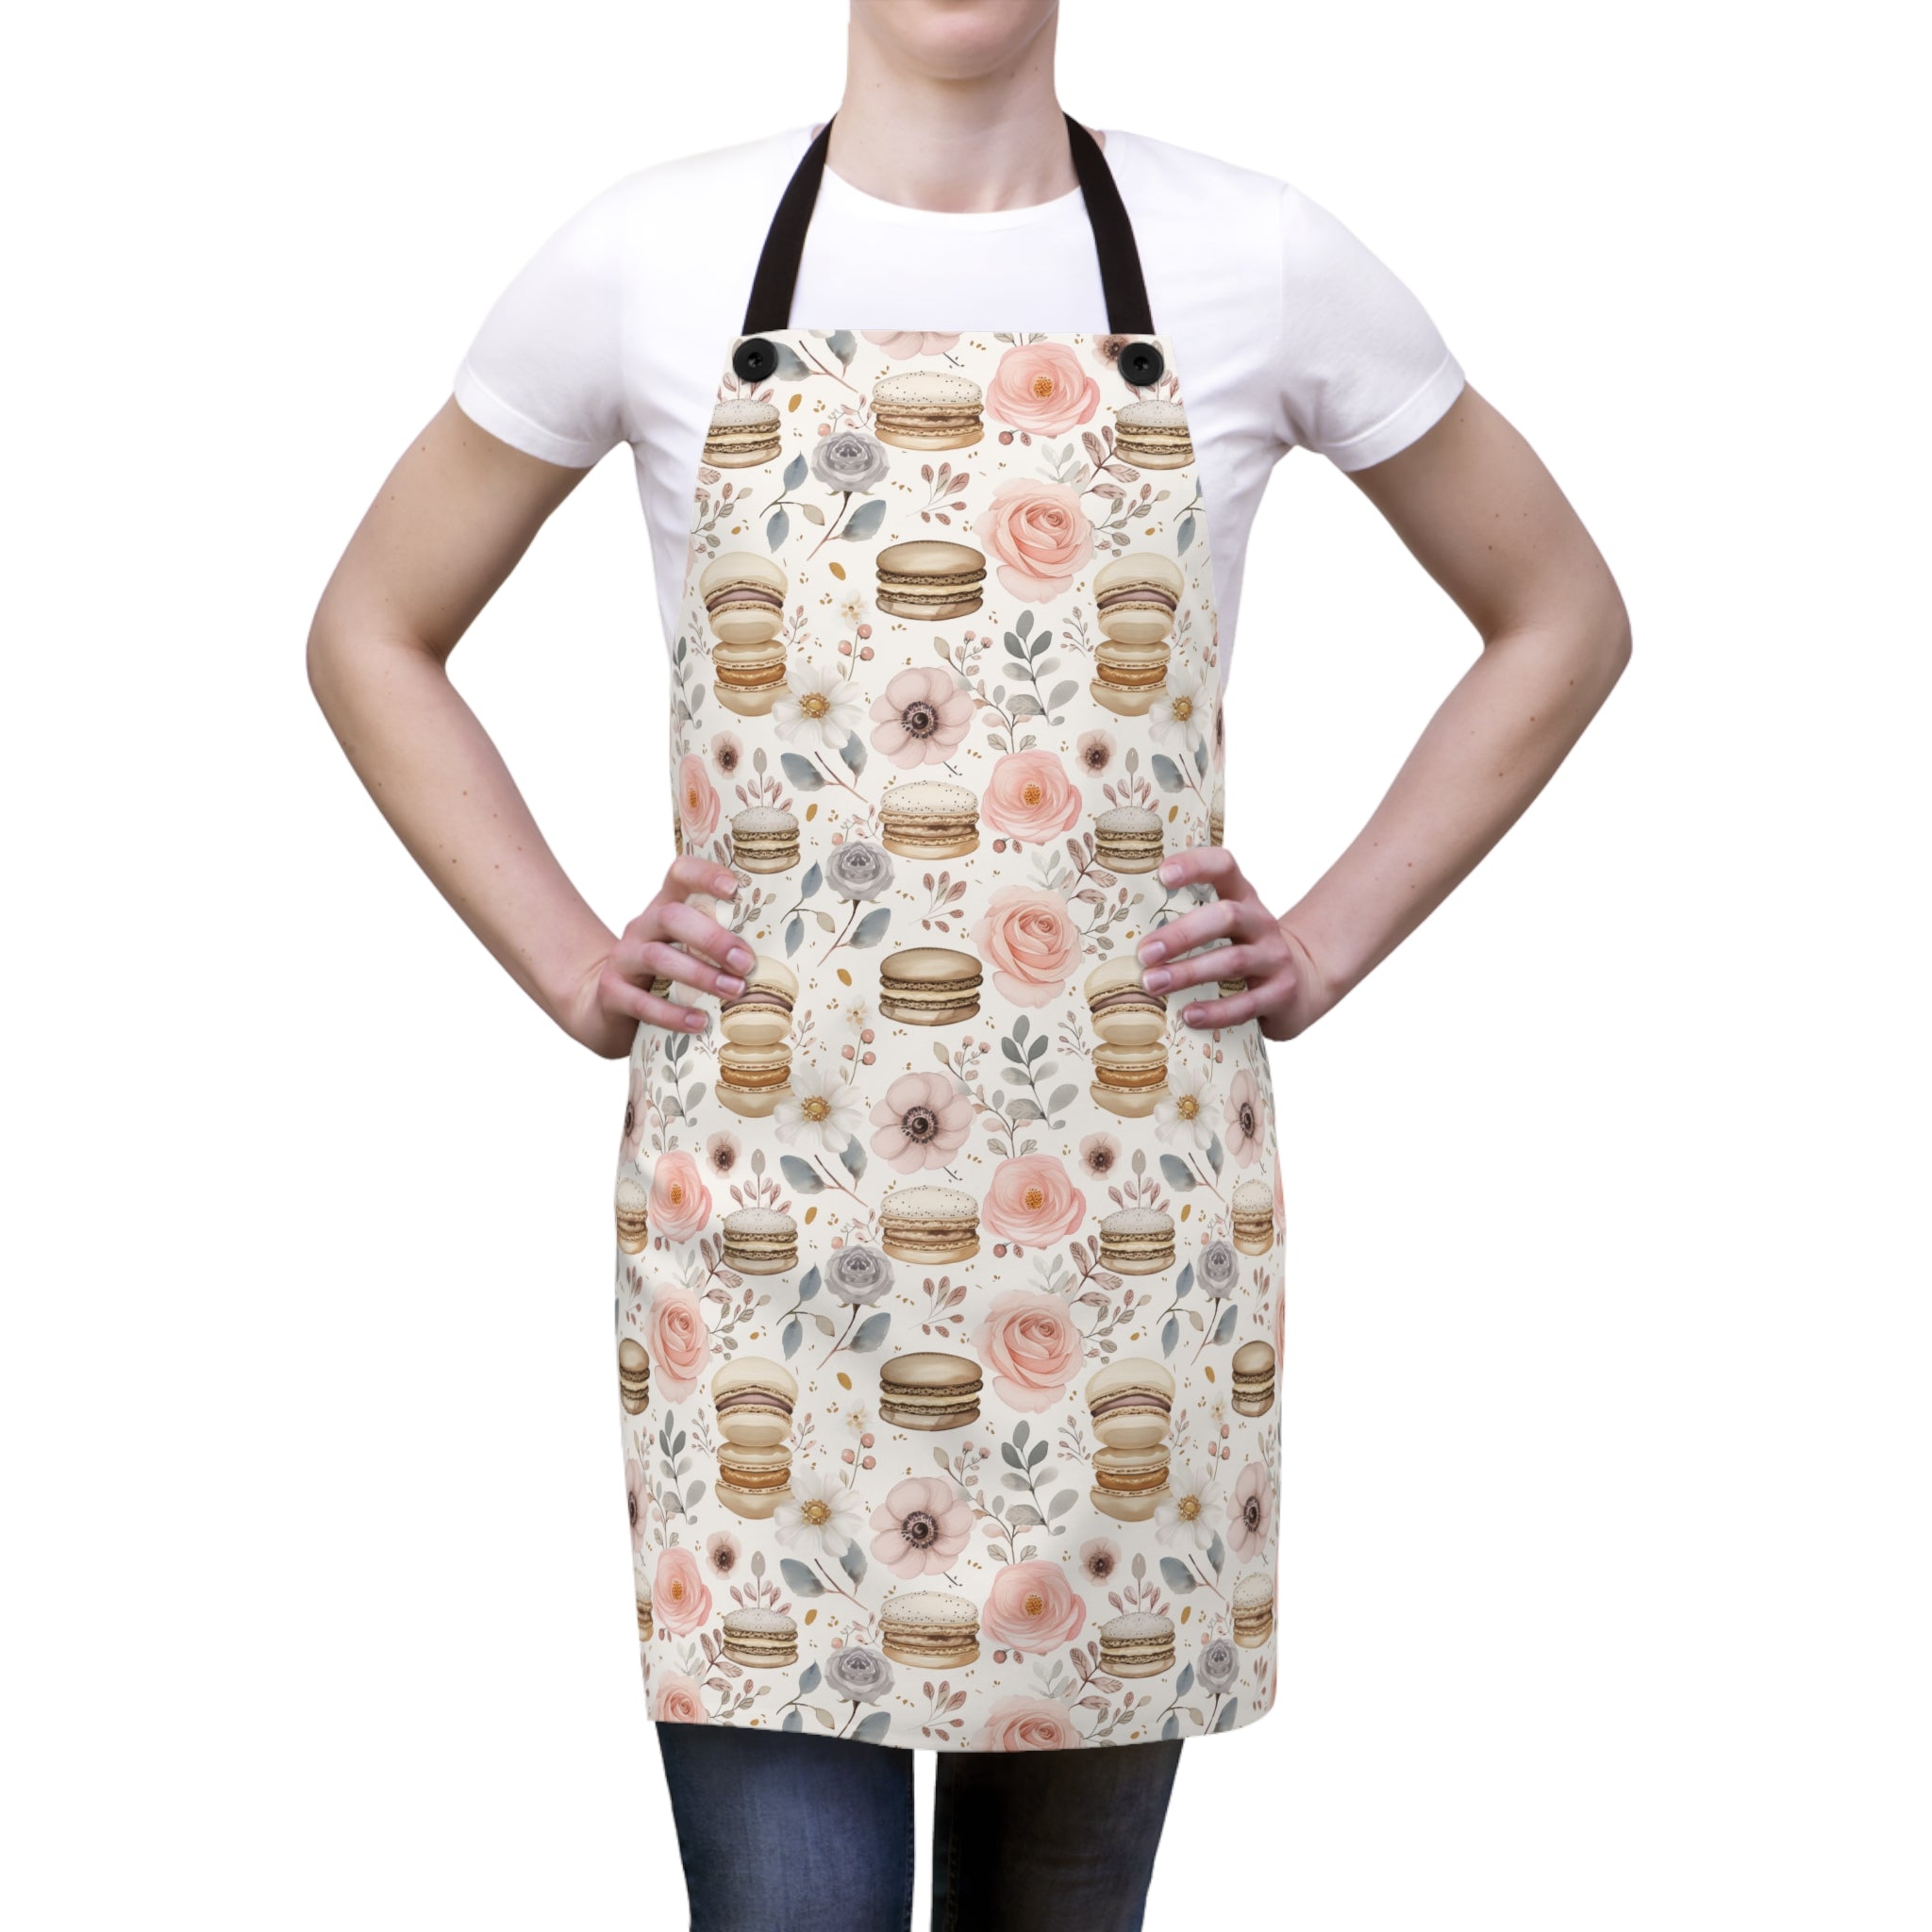 Stay Stylish While Baking: It's Raining Macaroons Pastry Chef's Dream Pattern Apron (AOP) For Foodies and The Amateur Cook Who Loves a Good Laugh in Style